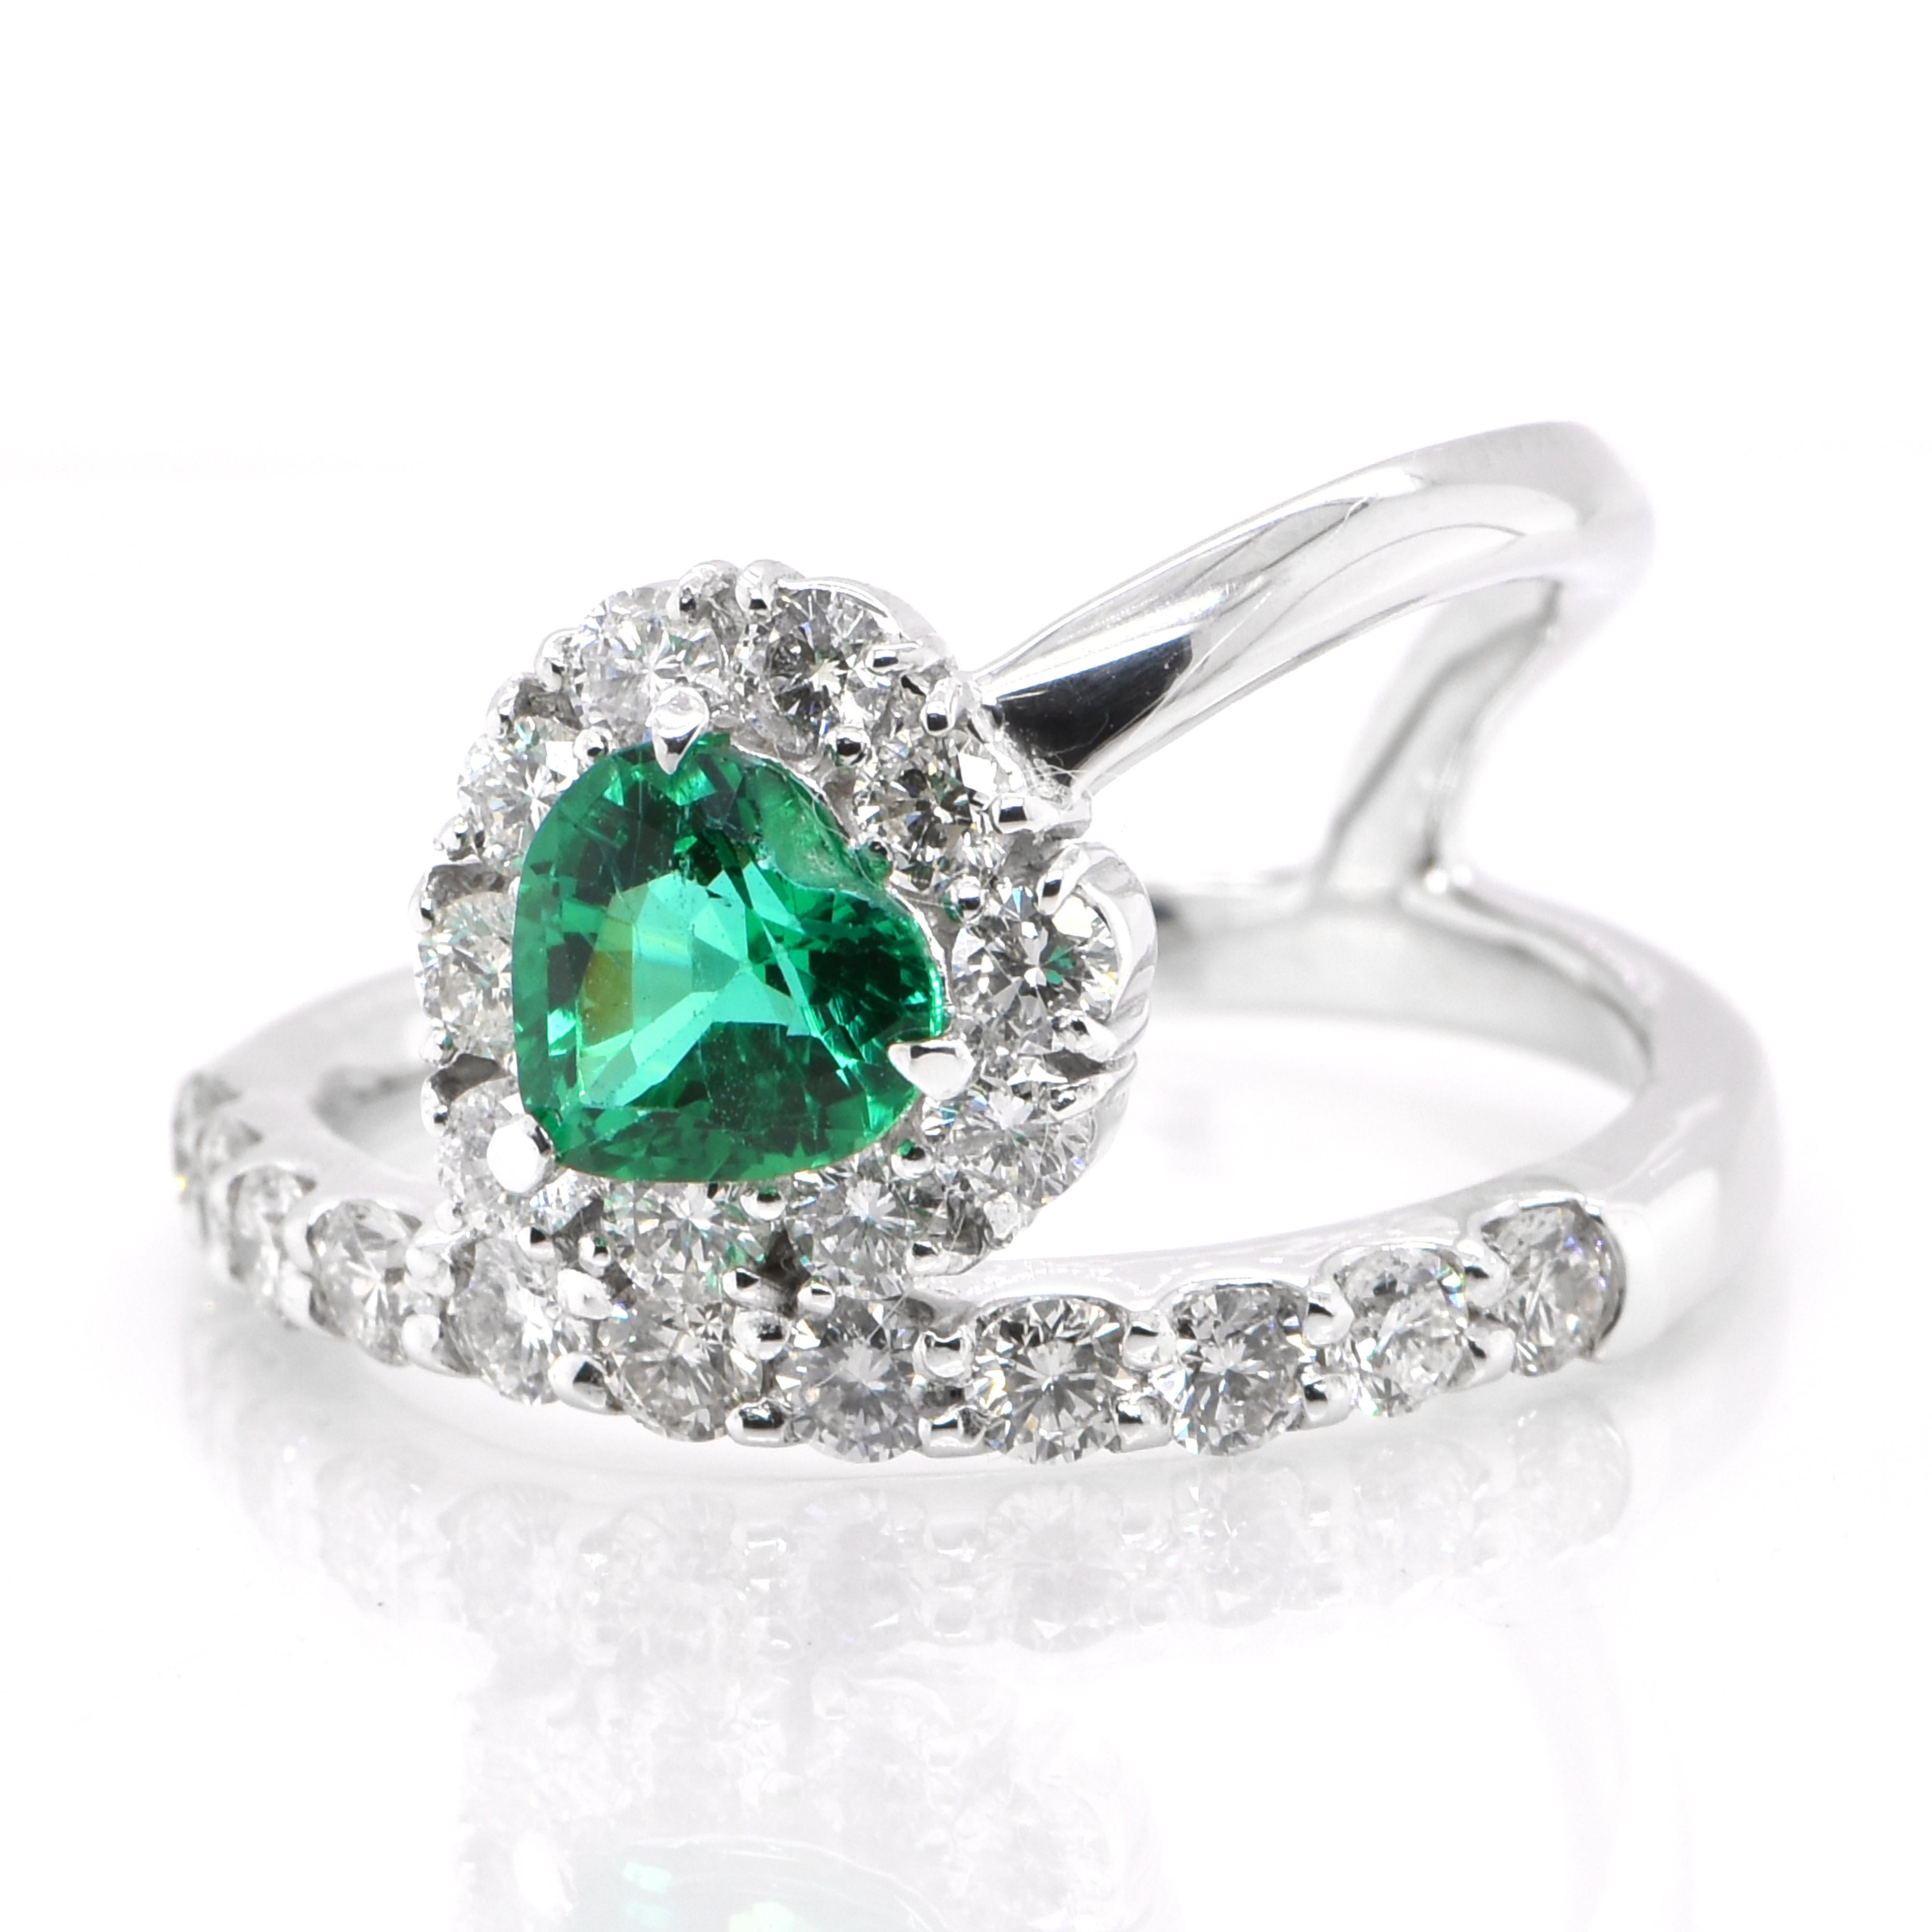 A stunning ring featuring a 0.85 Carat Natural Zambian Emerald and 1.07 Carats of Diamond Accents set in Platinum. People have admired emerald’s green for thousands of years. Emeralds have always been associated with the lushest landscapes and the